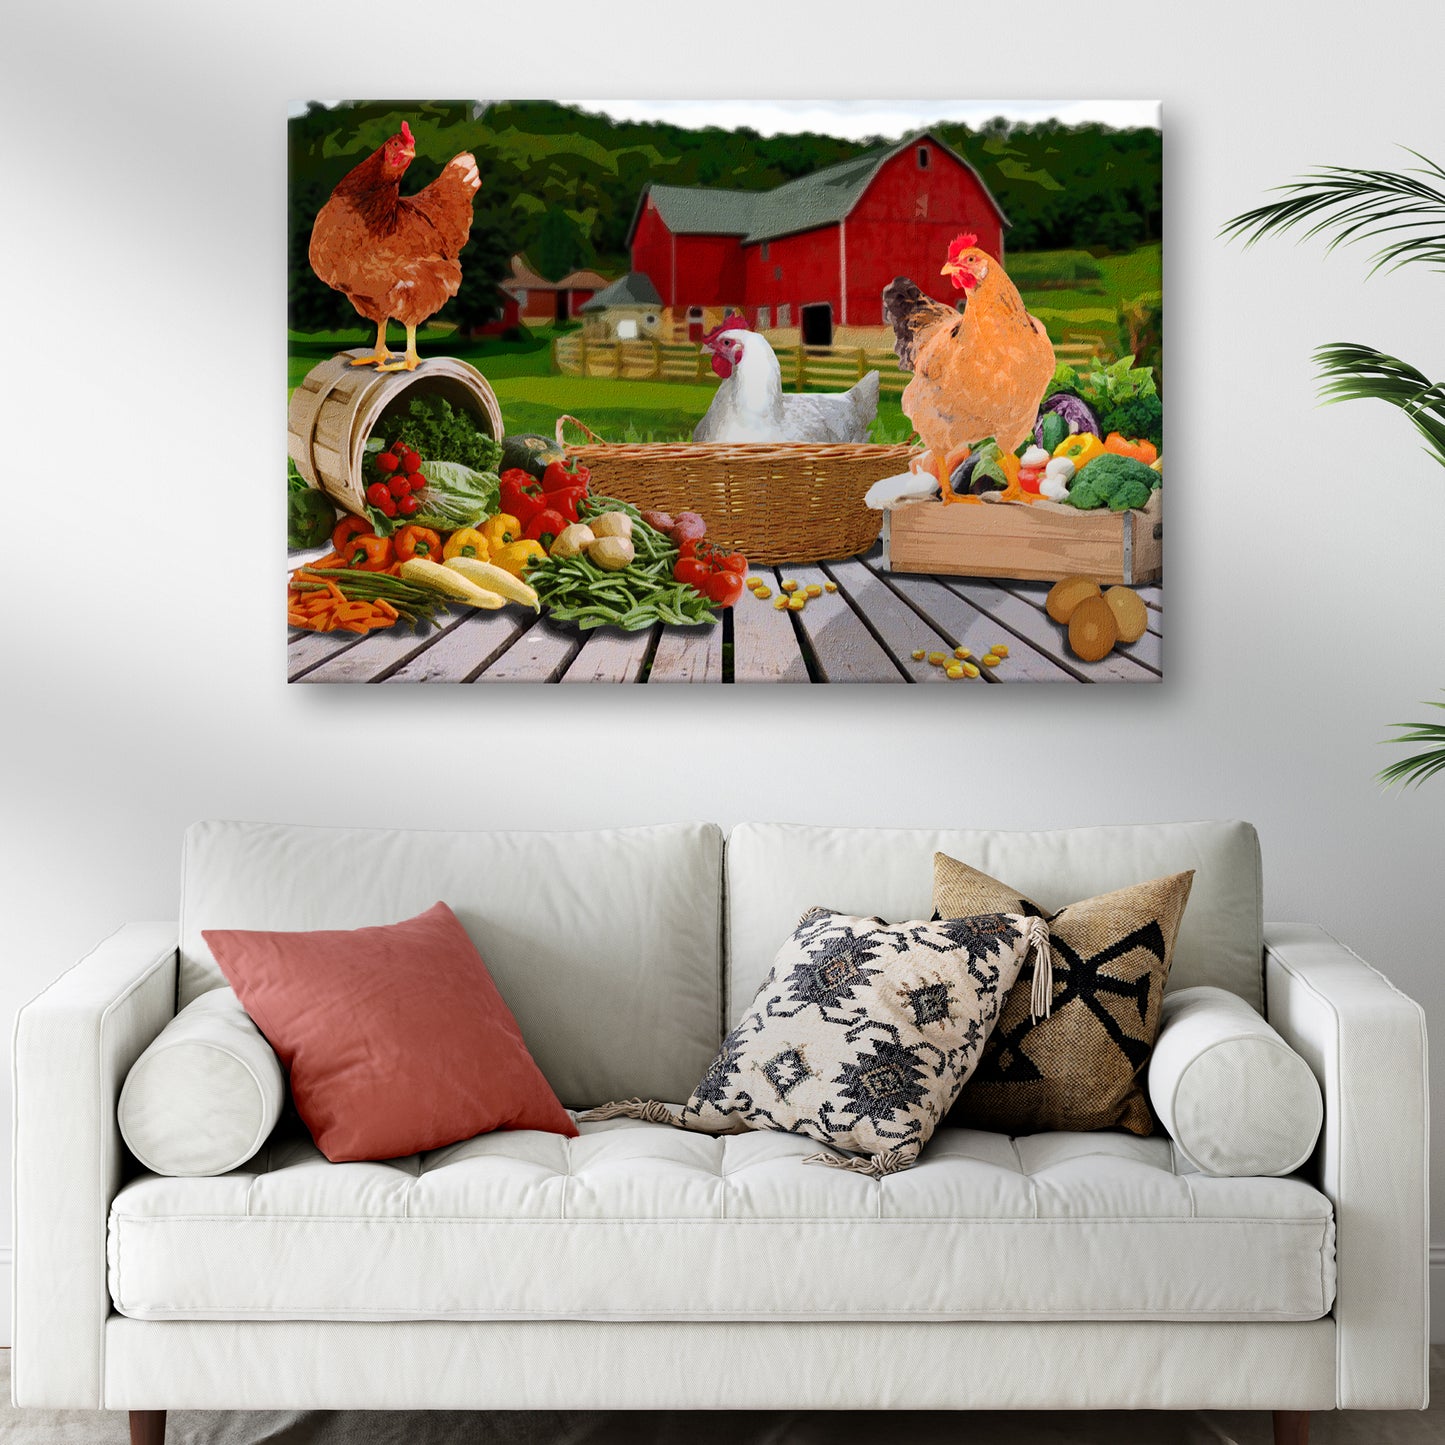 Chicken Farm And Veggies Canvas Wall Art Style 2 - Image by Tailored Canvases